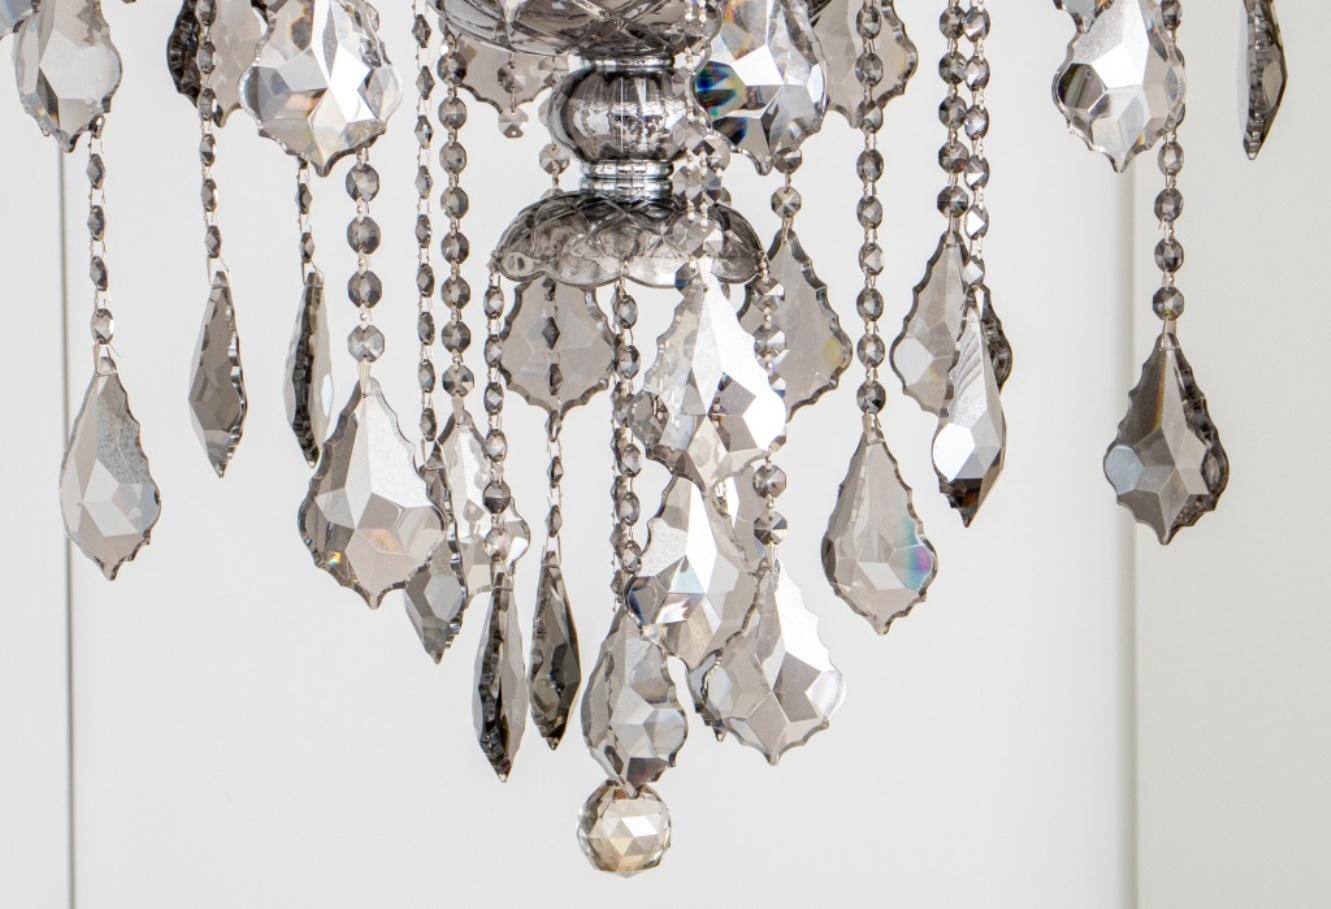 Waterford style twenty-arm smoky crystal glass chandelier with hanging pendants and candlestick form lights. 44